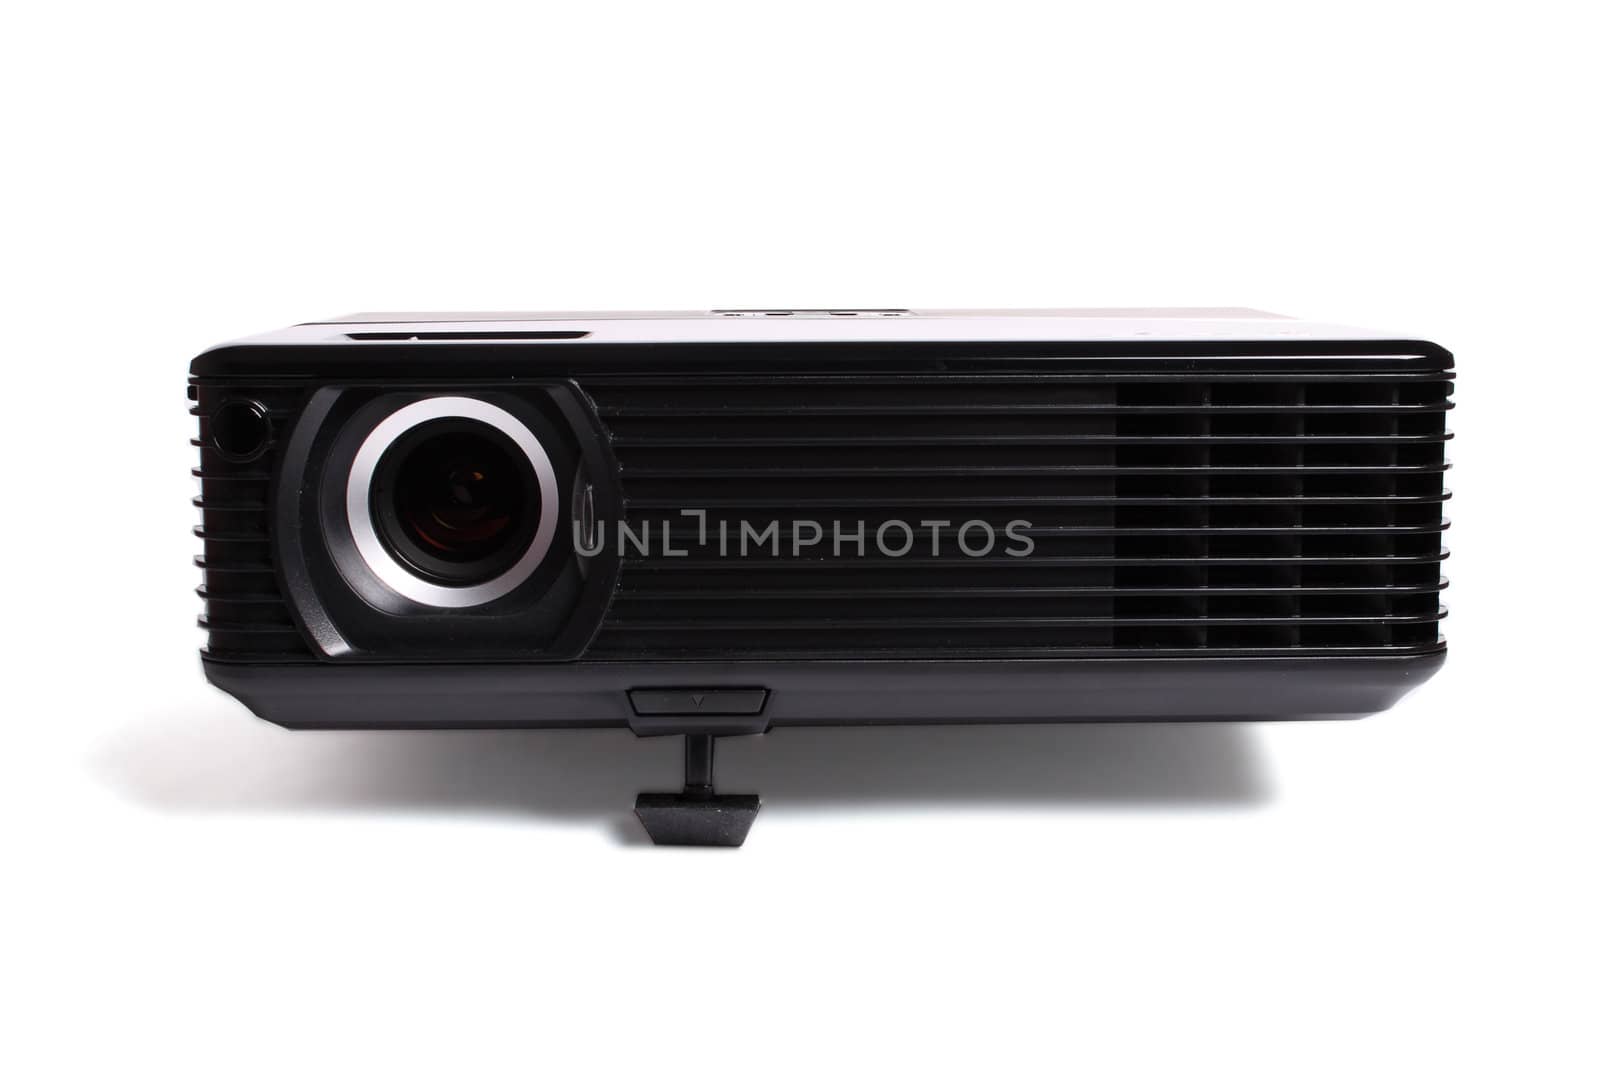 black multimedia projector isolated over white background